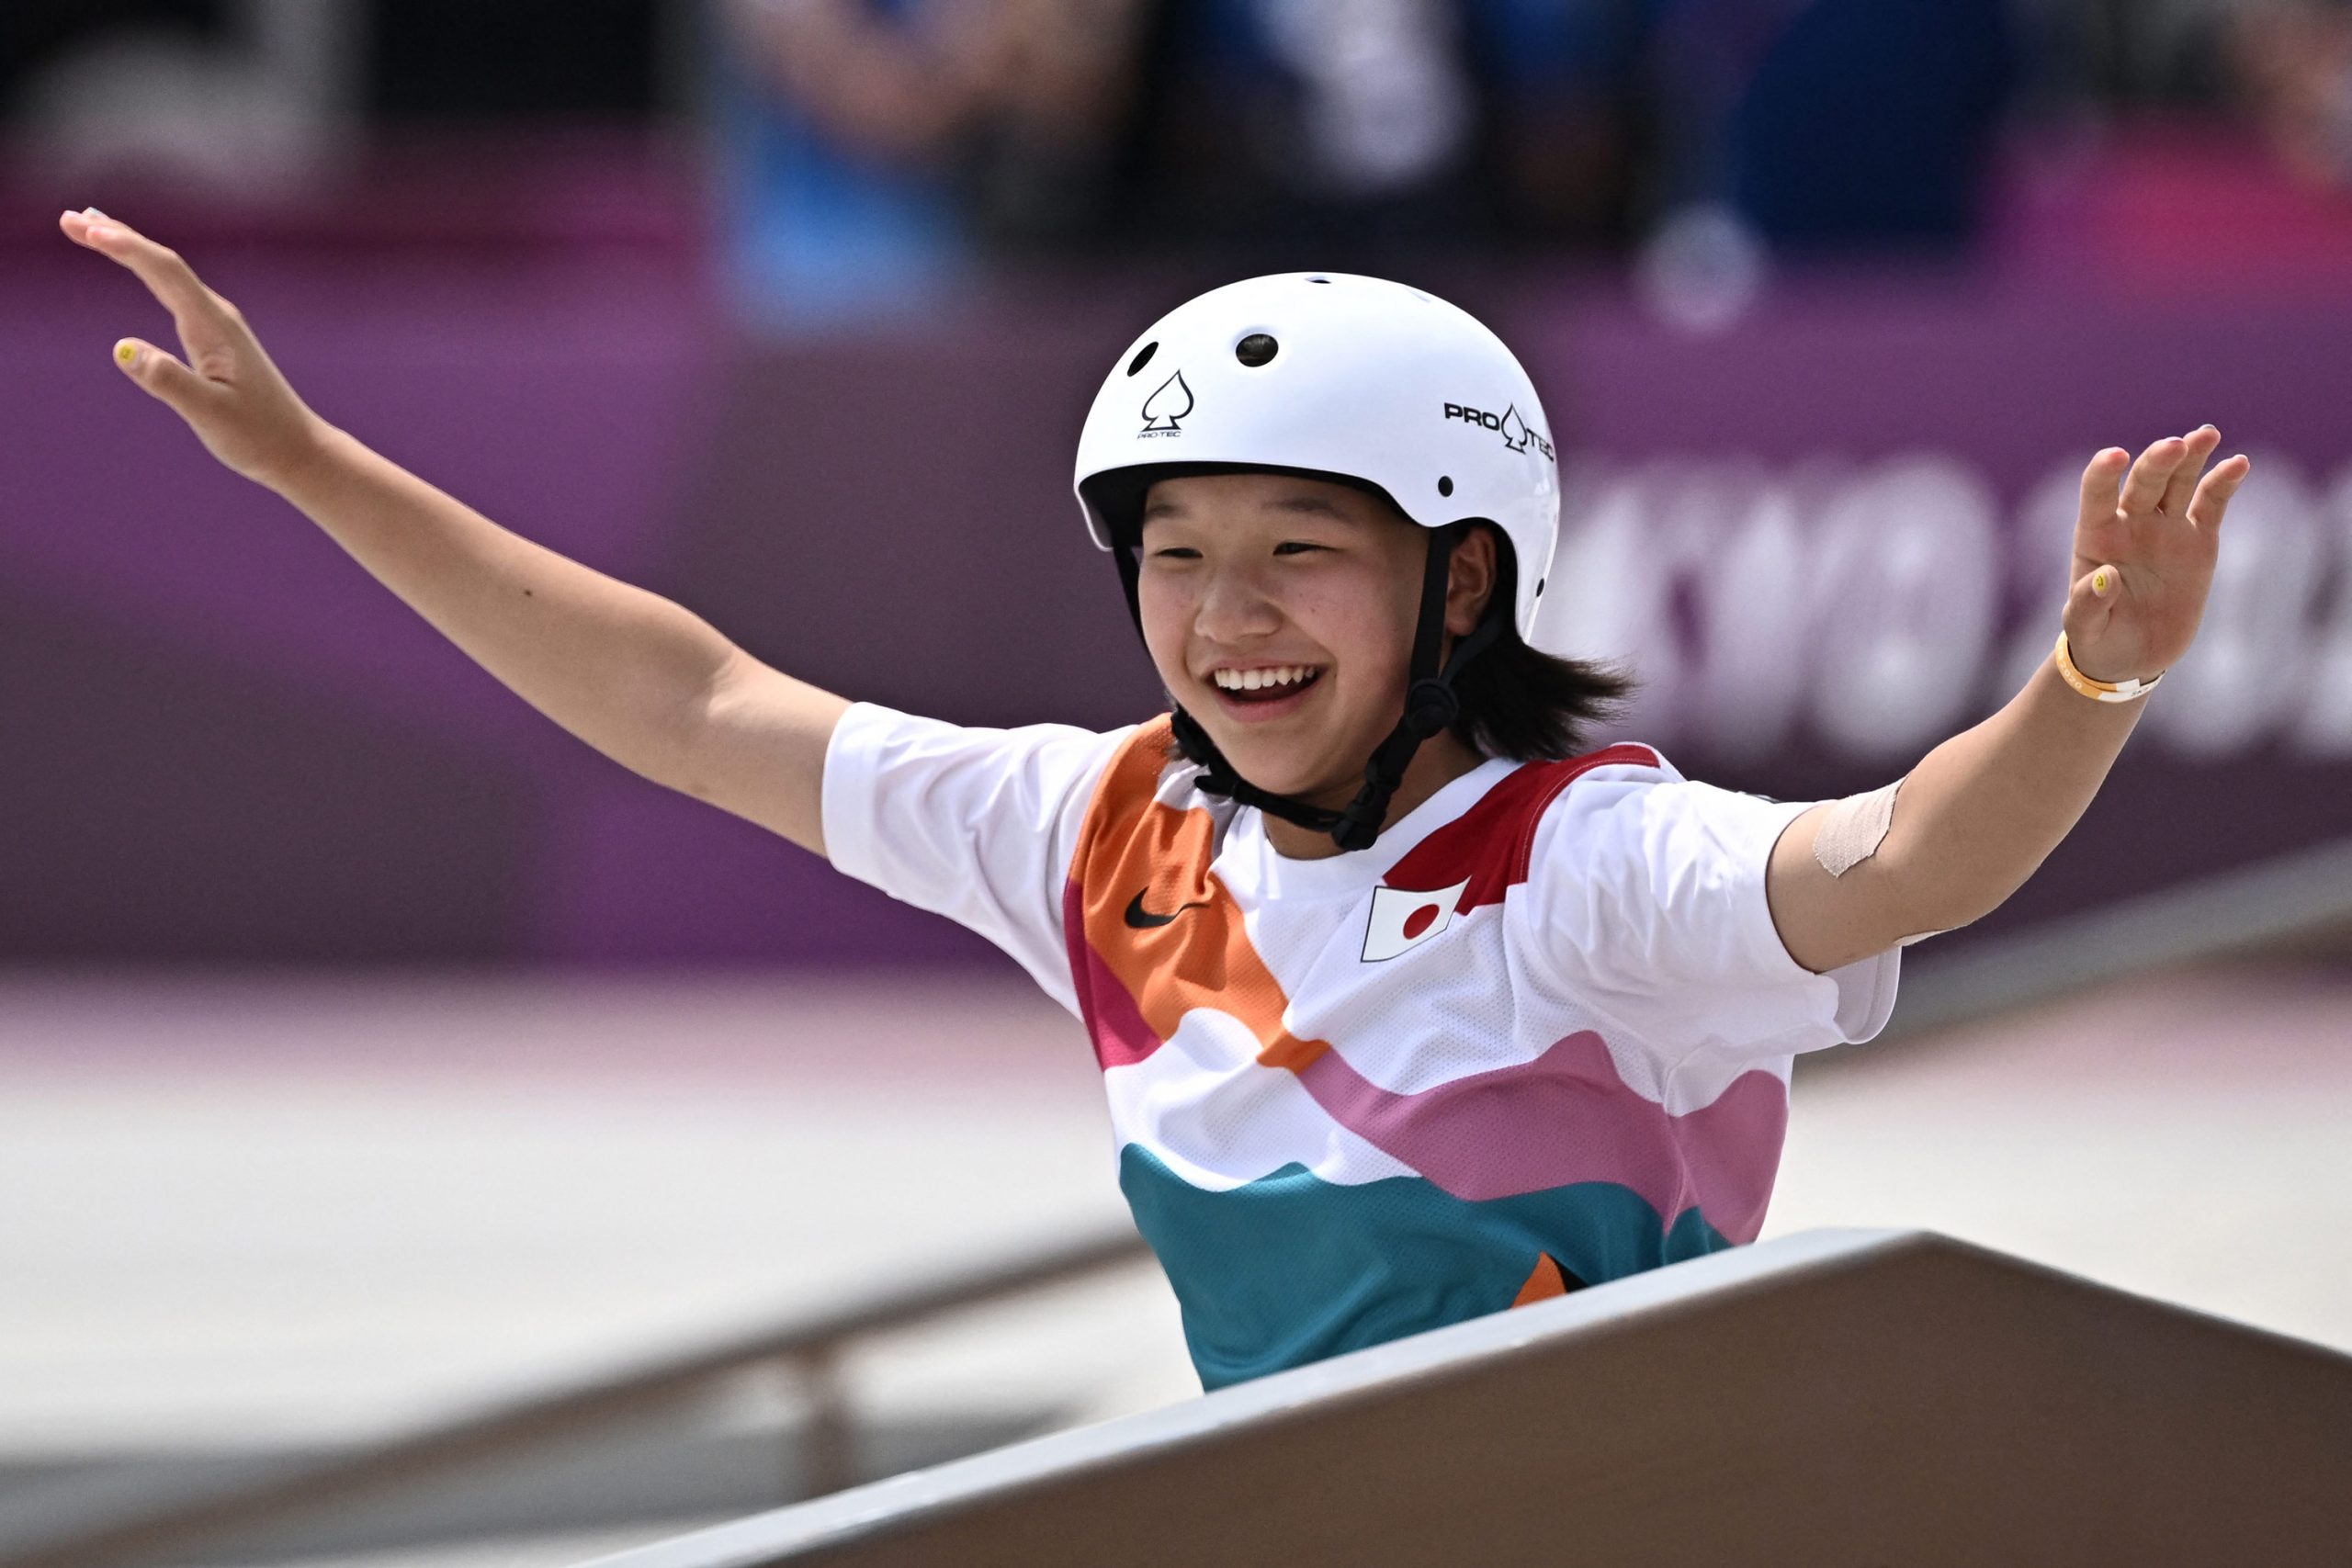 Skateboarder Nichia Momiji, 13, becomes one of the youngest ever gold medalists